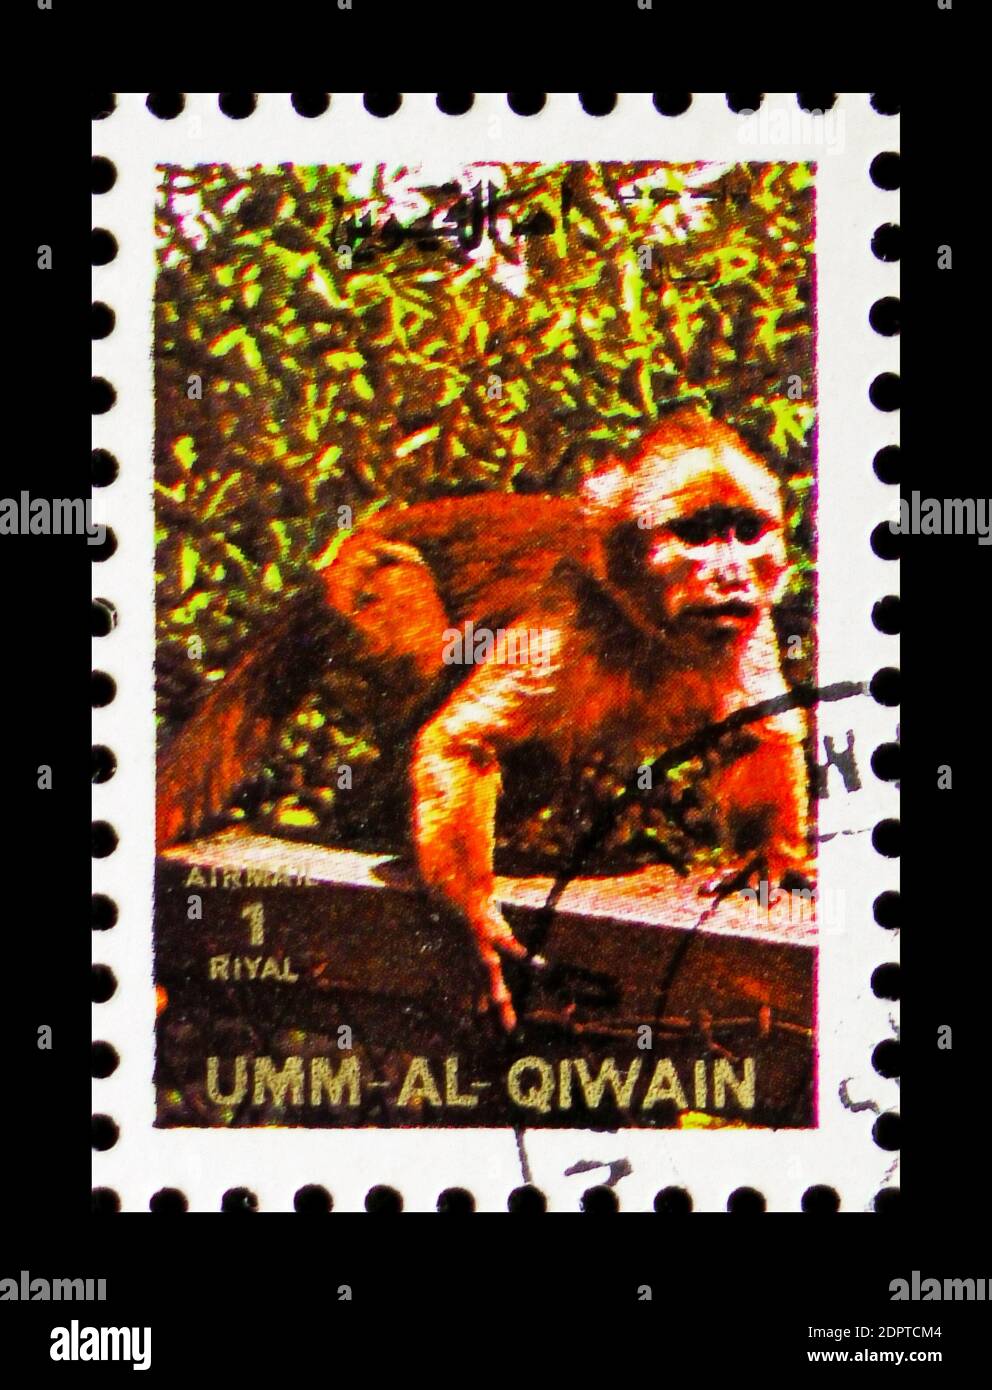 MOSCOW, RUSSIA - NOVEMBER 10, 2018: A stamp printed in Umm Al Quwain shows Titi (Callicebinae), Animals; large format serie, circa 1972 Stock Photo